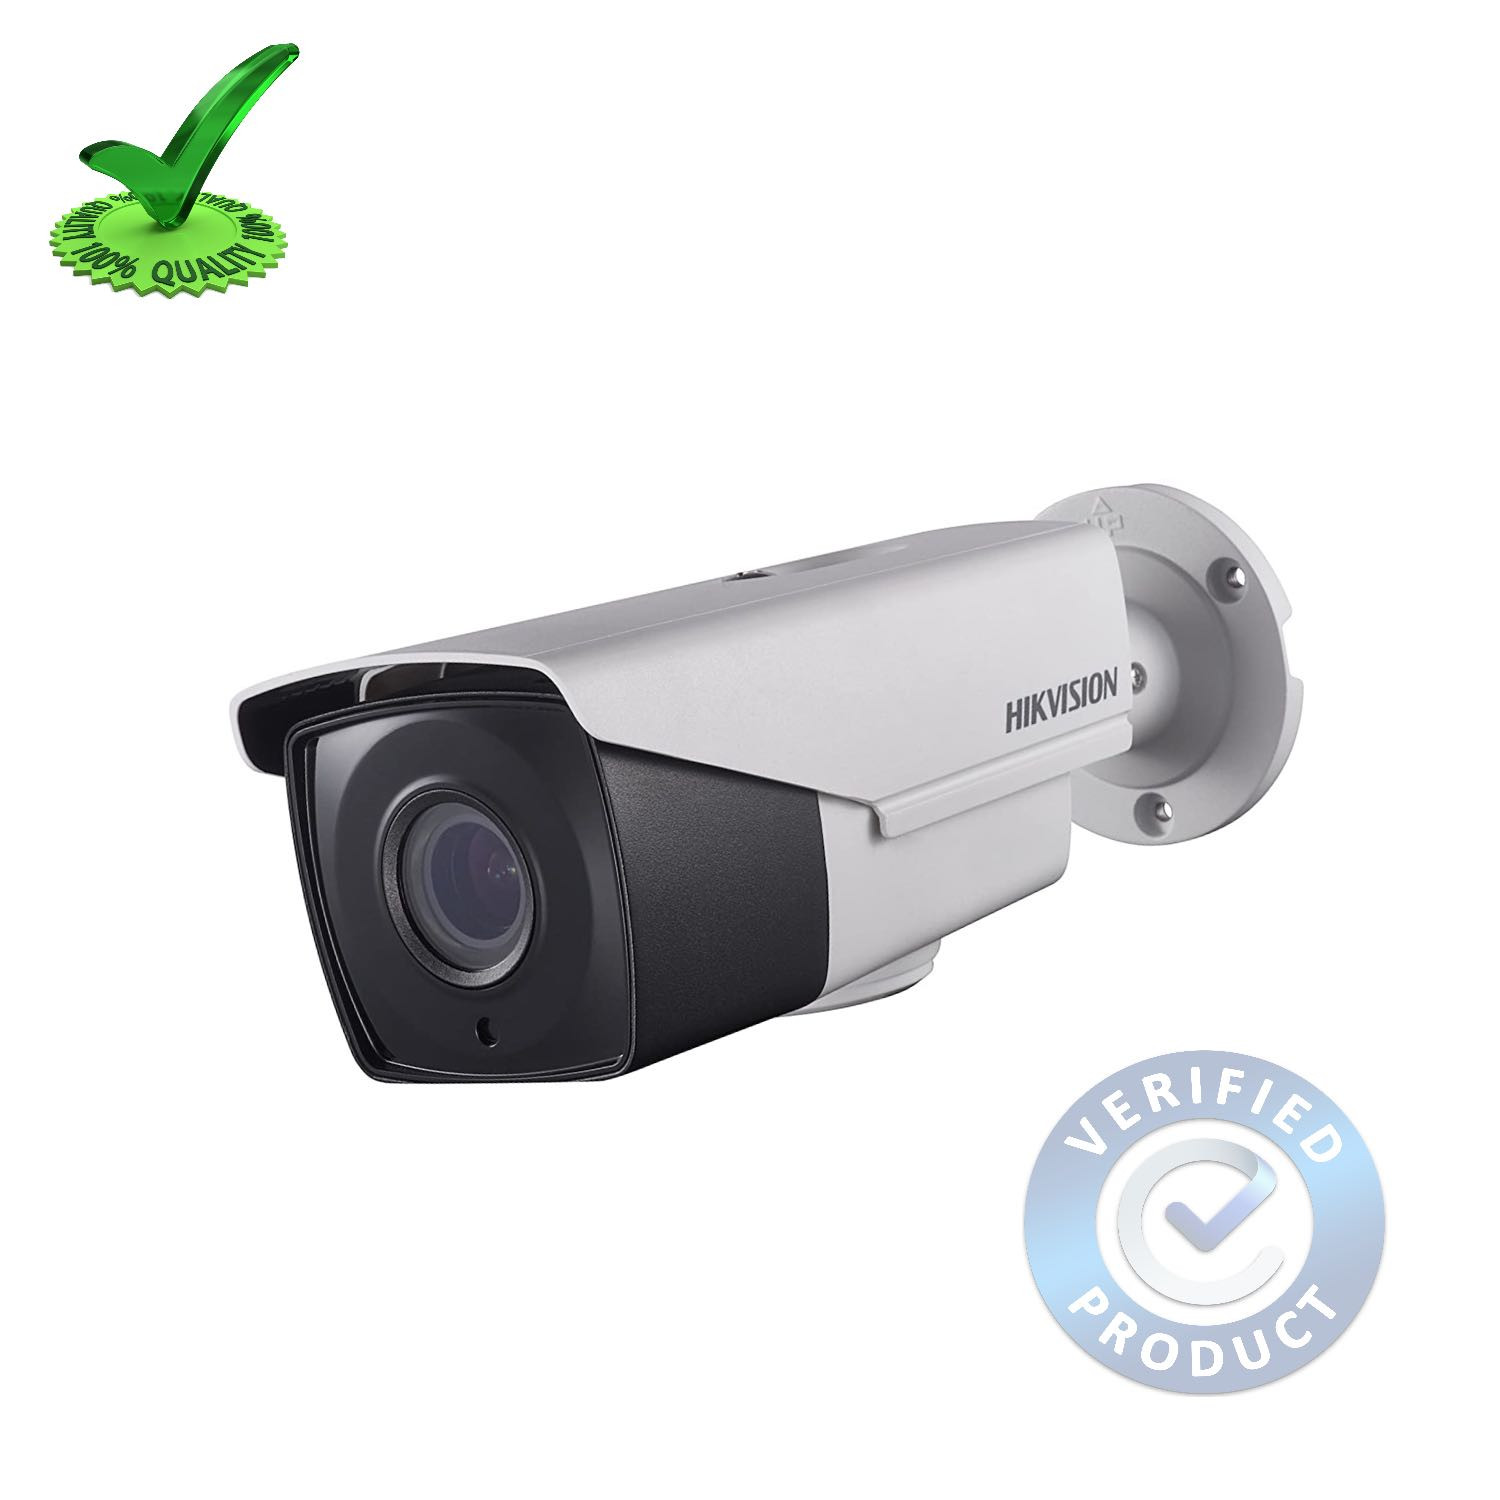 Hikvision DS-2CE1AD0T-IT3F 2MP HD Bullet Camera